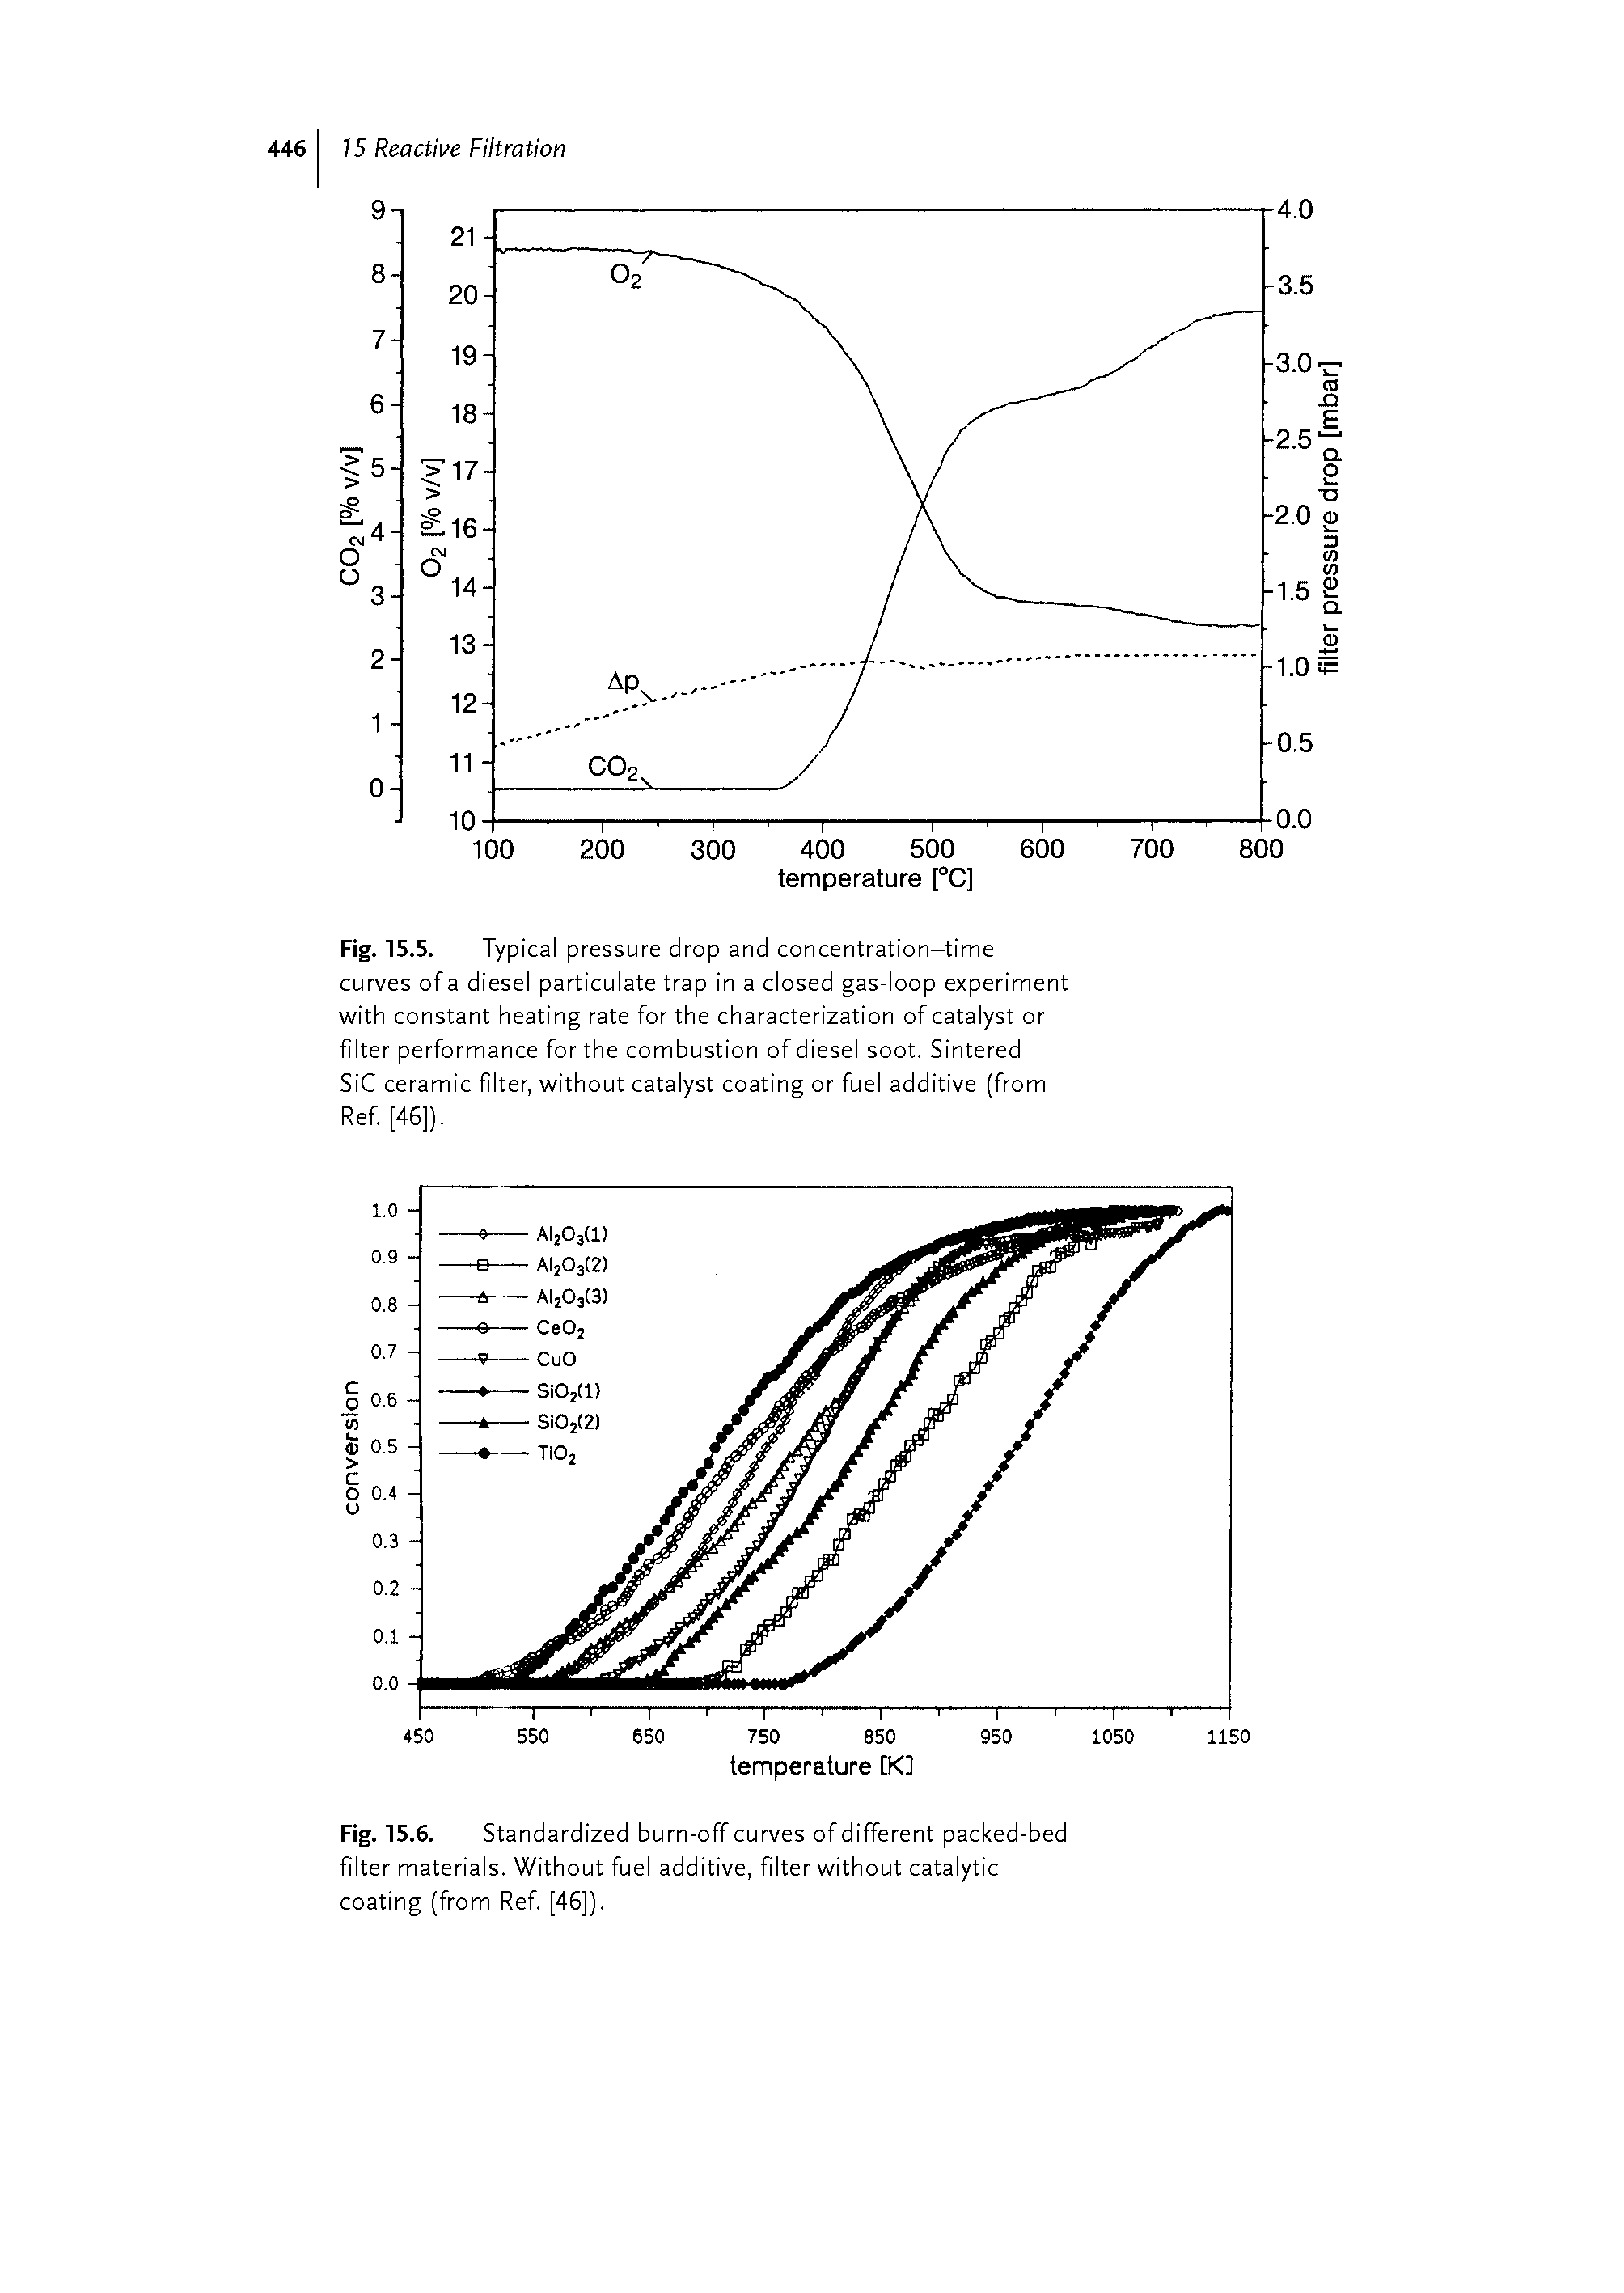 Fig. 15.5. Typical pressure drop and concentration-time curves of a diesel particulate trap in a closed gas-loop experiment with constant heating rate for the characterization of catalyst or filter performance for the combustion of diesel soot. Sintered SiC ceramic filter, without catalyst coating or fuel additive (from Ref. [46]).